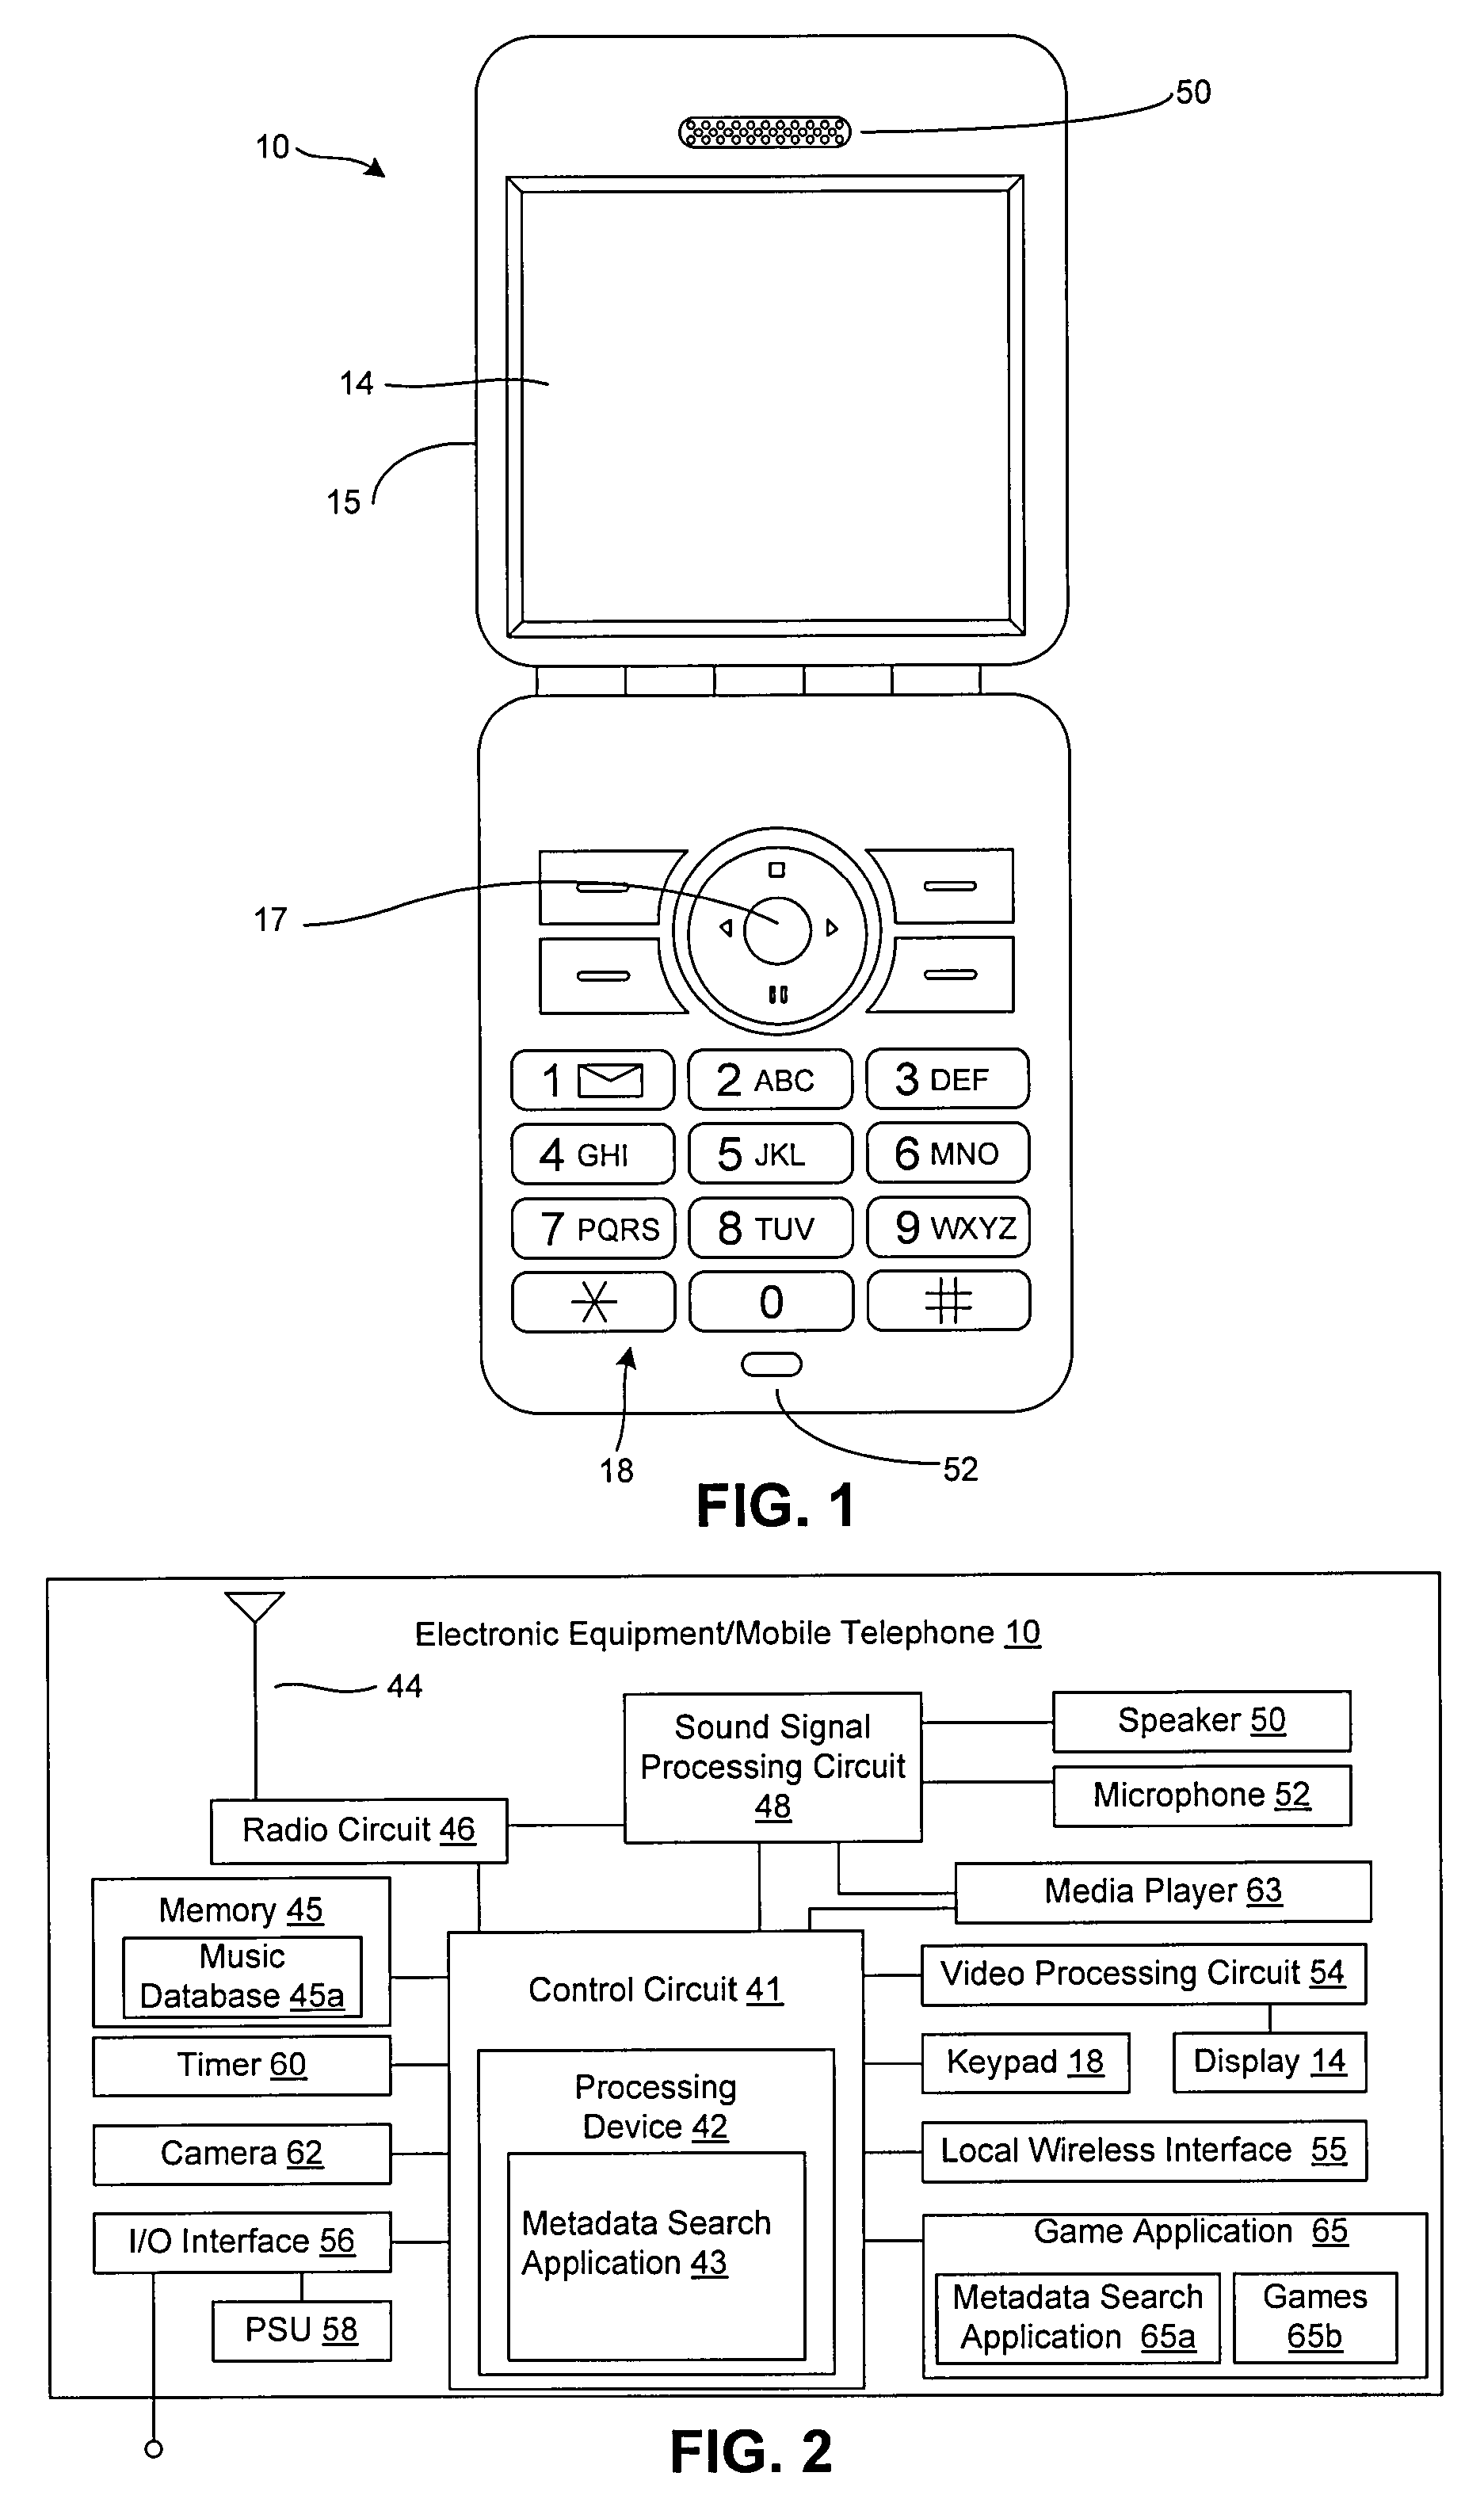 System and method of using metadata to incorporate music into non-music applications